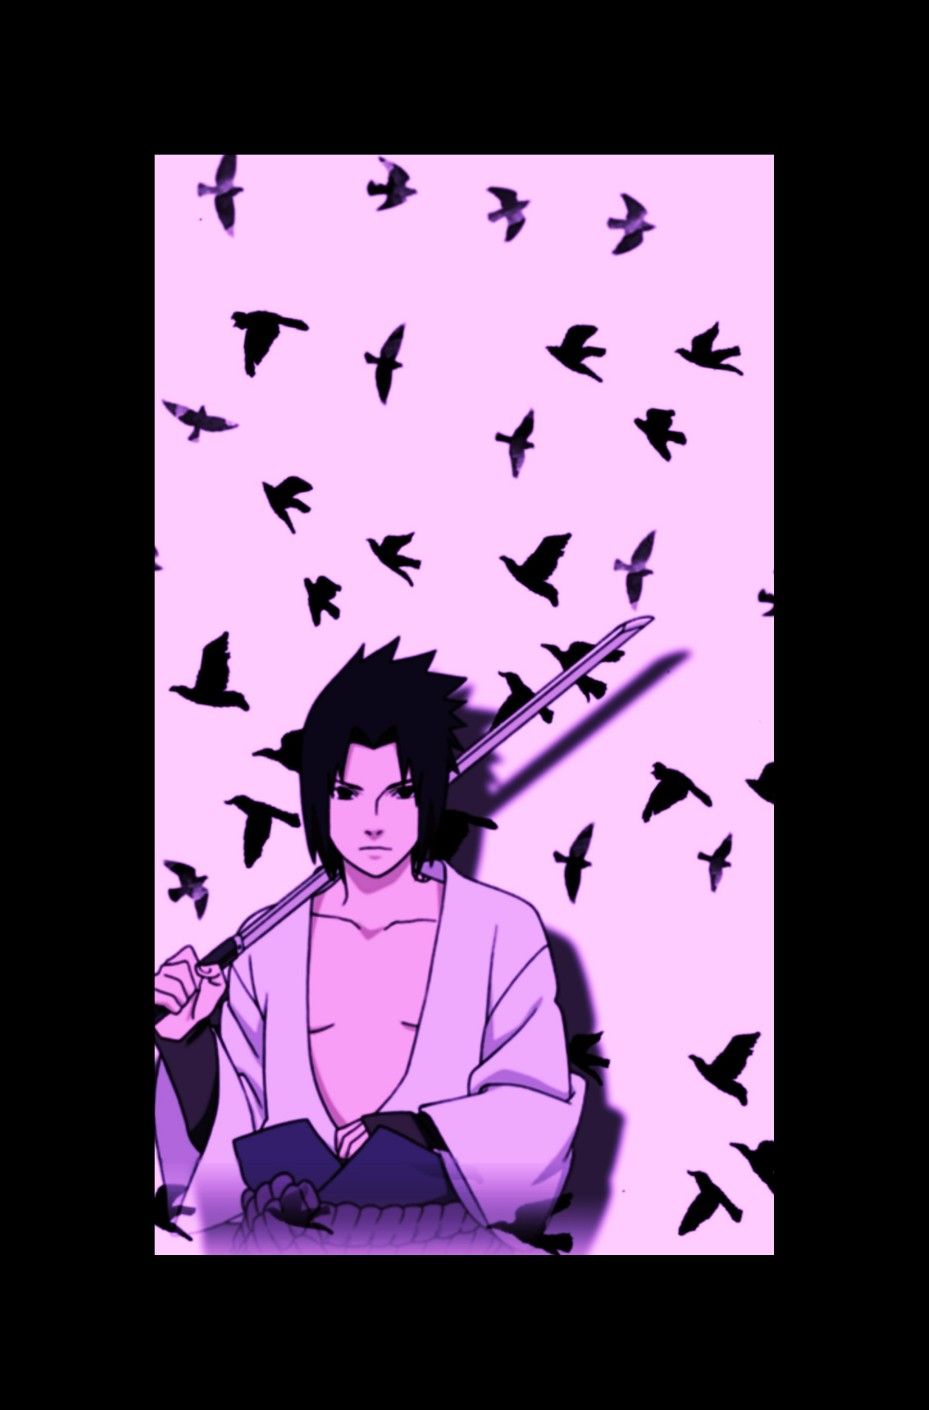 Wallpaper sasuke sharingan with high-resolution 1080x1920 pixel. You can use this wallpaper for your Windows and Mac OS computers as well as your Android and iPhone smartphones - Sasuke Uchiha